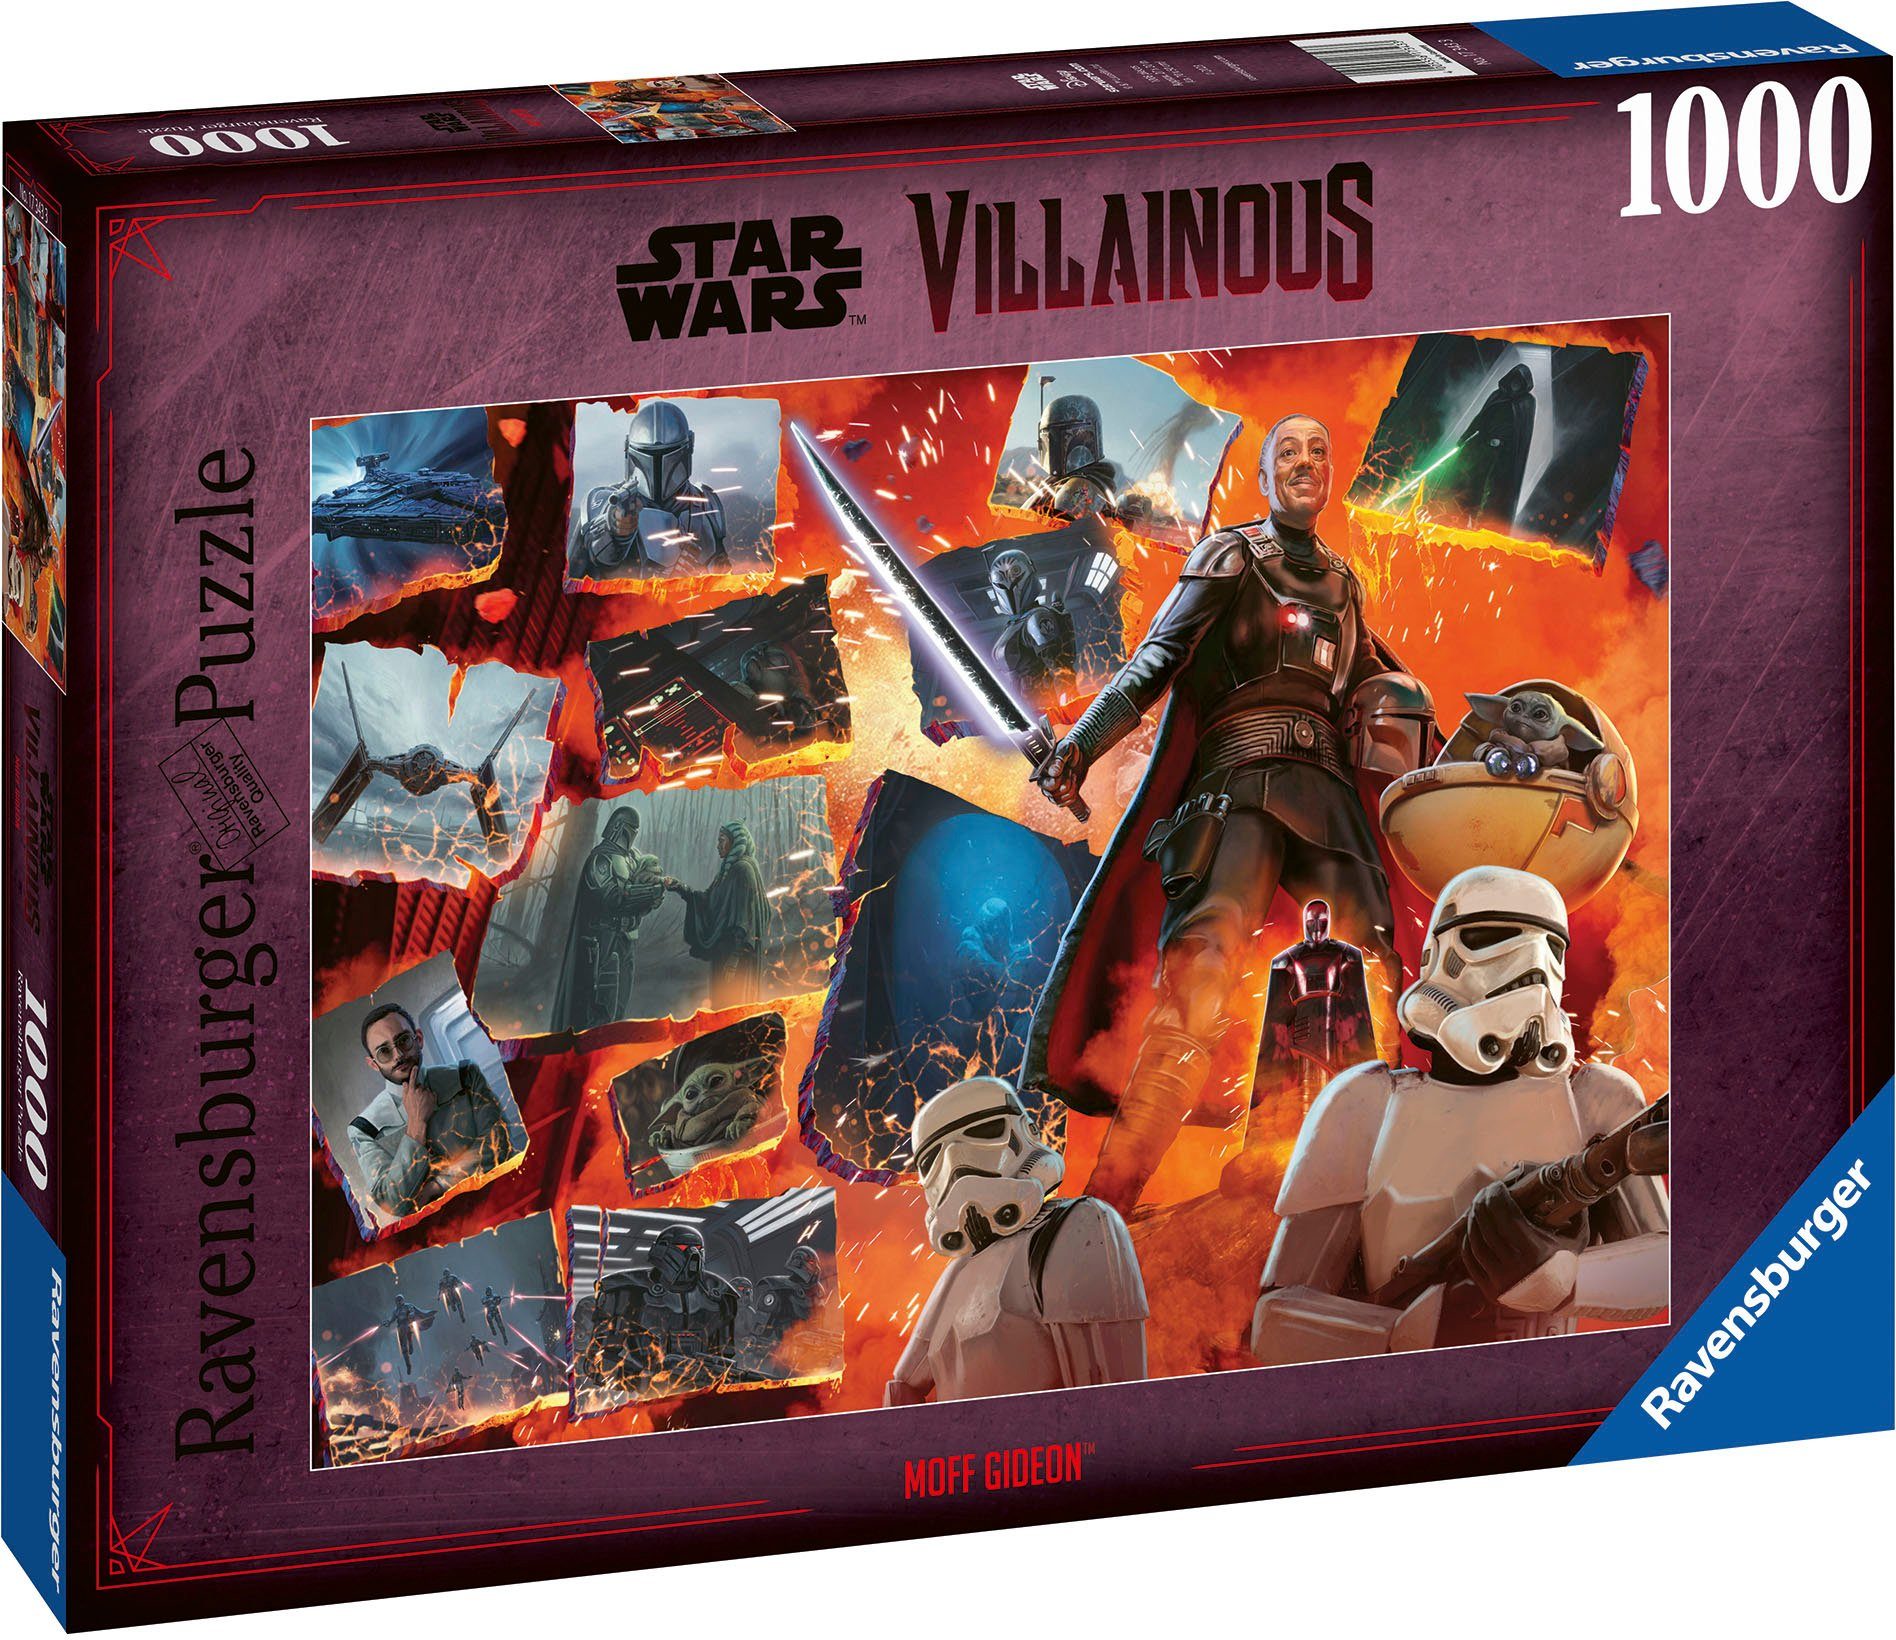 Villainous, Gideon, Made 1000 Puzzle in Moff Star Germany Wars Ravensburger Puzzleteile,